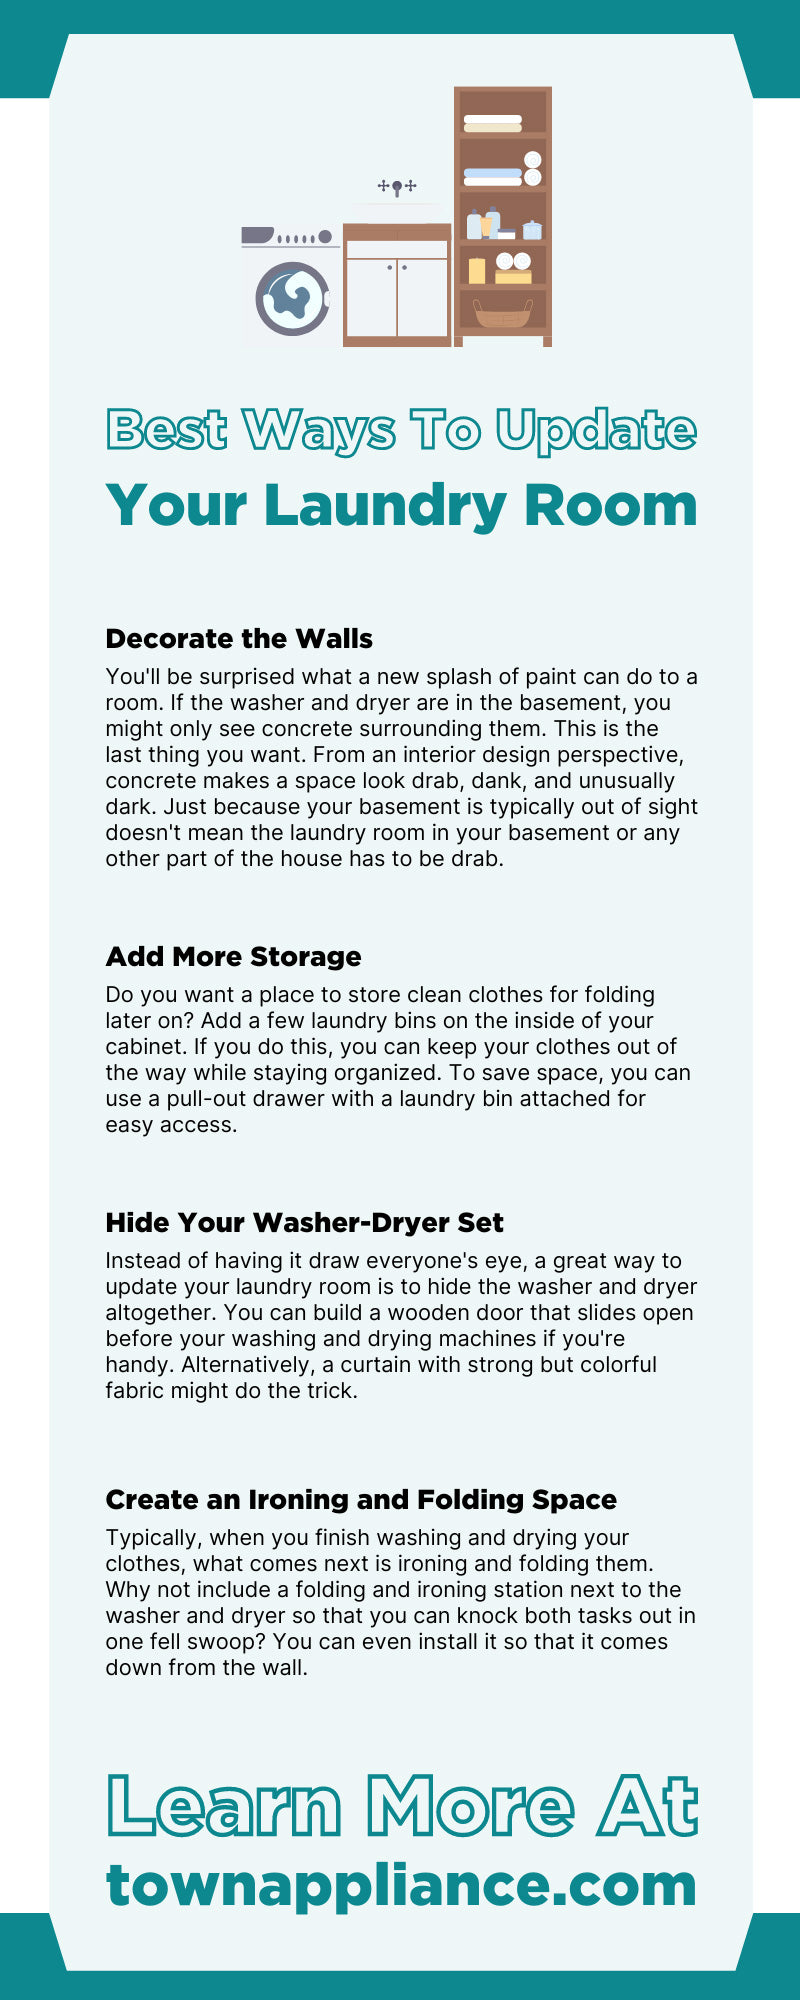 10 Best Ways To Update Your Laundry Room